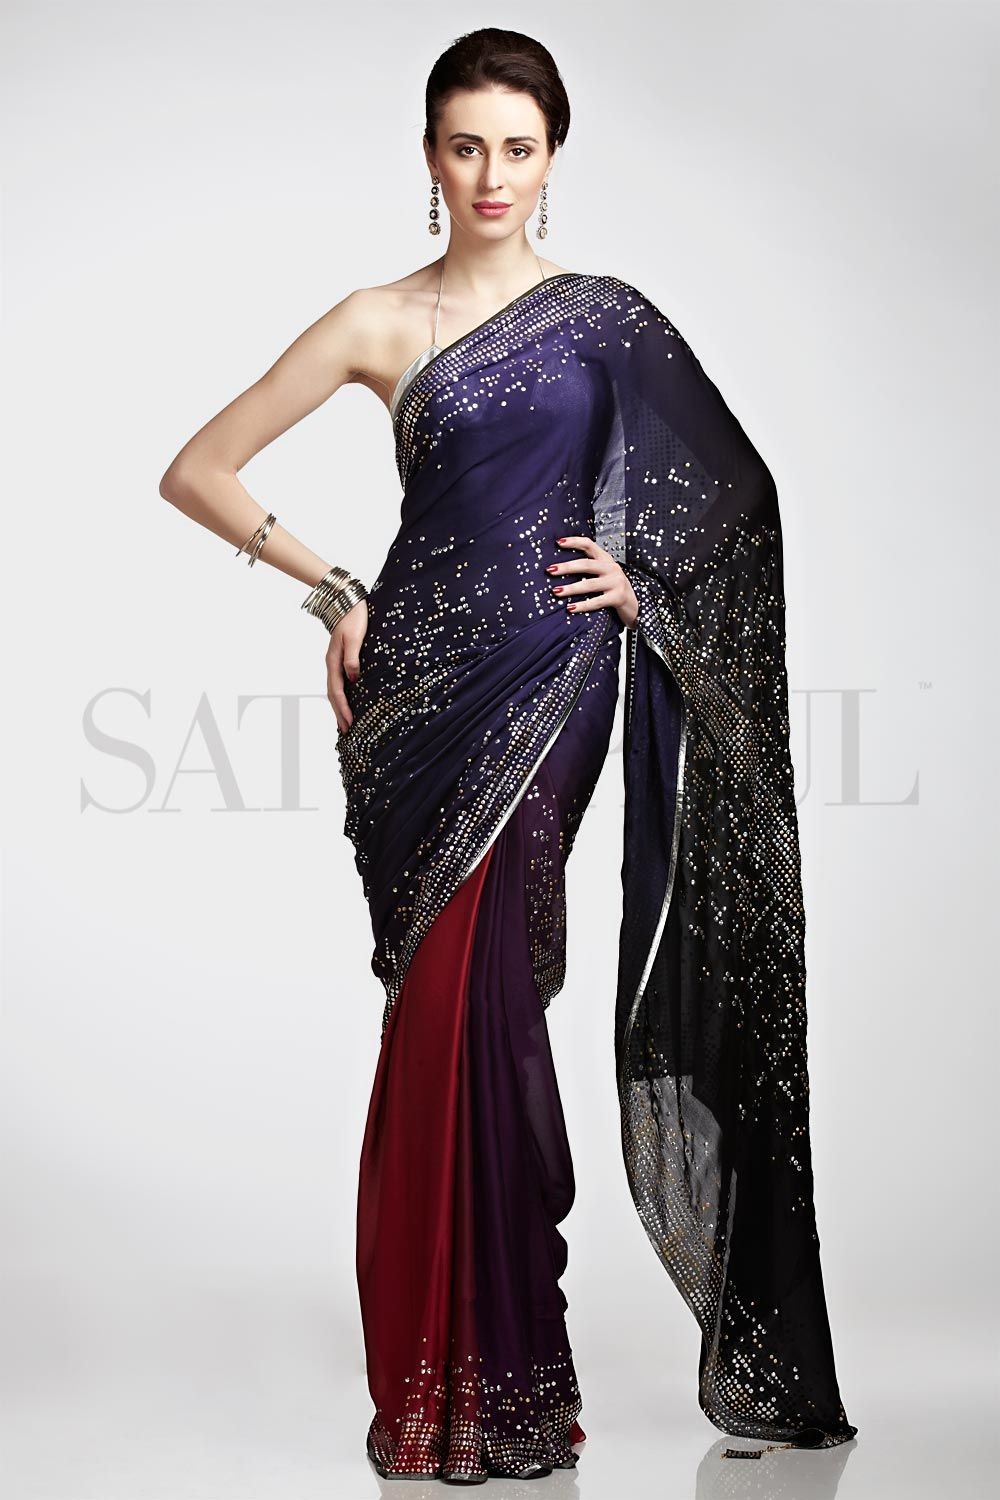 Indian Actresses and Models : Beautiful Models in Saree